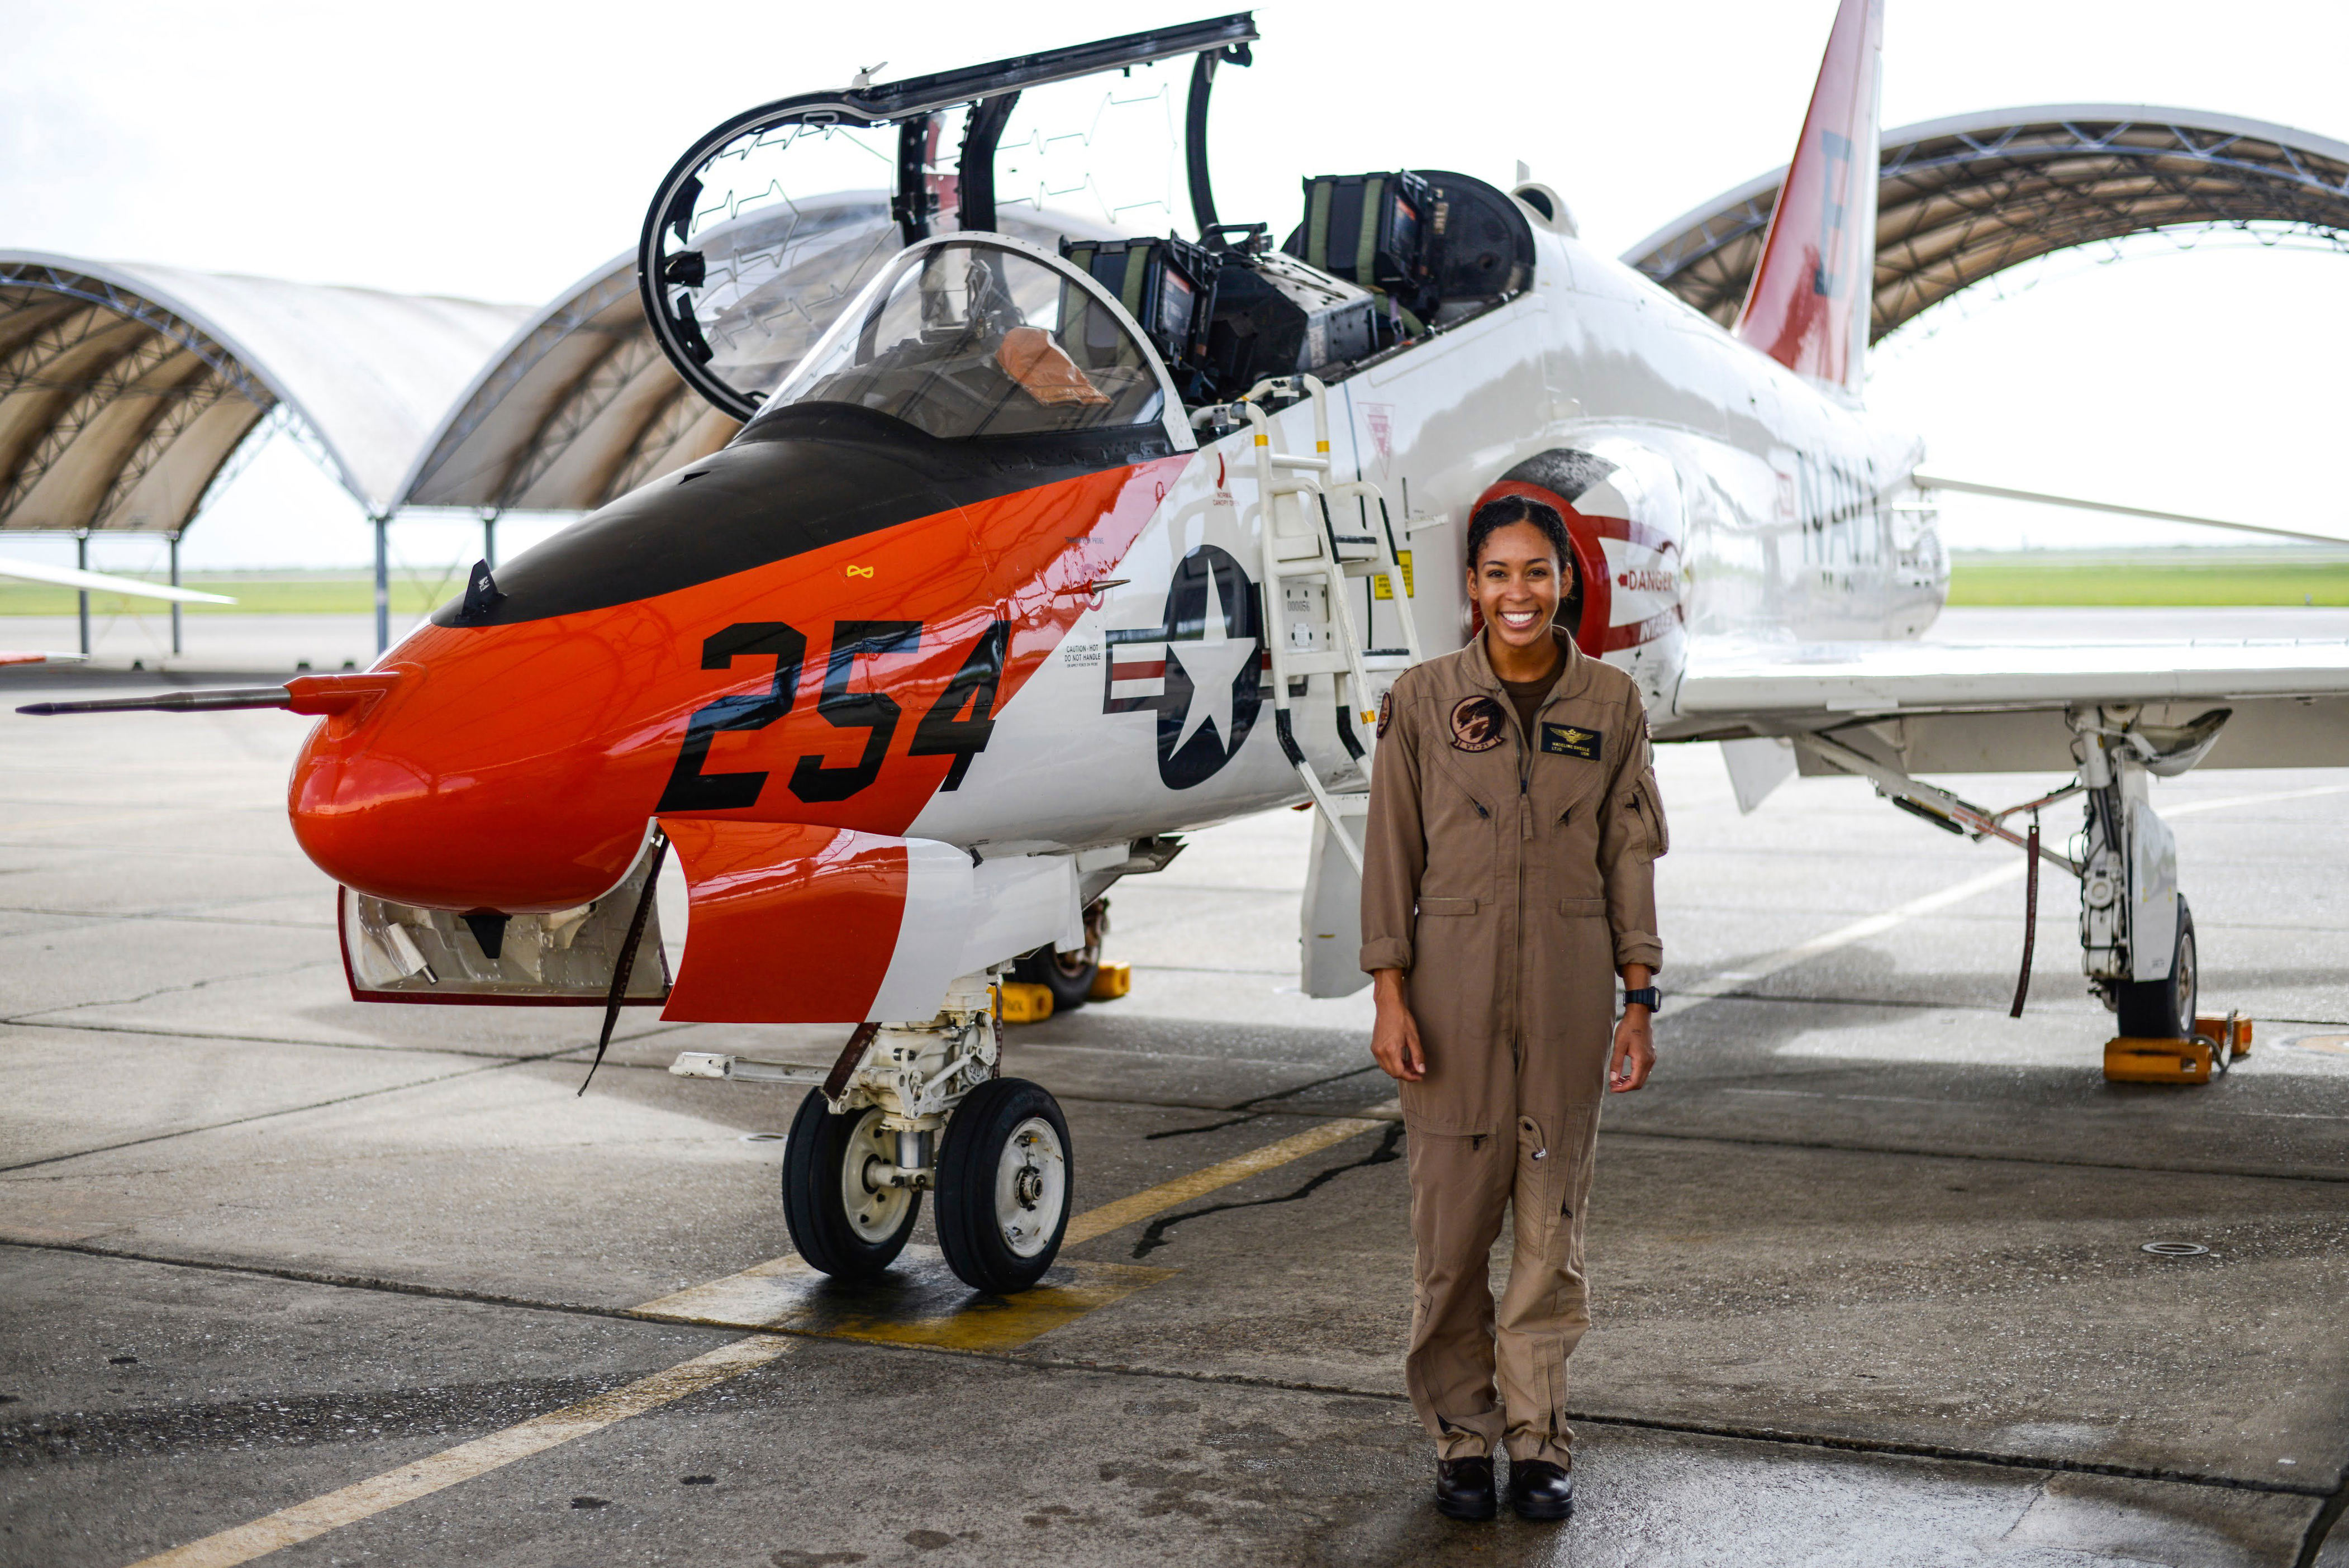 <p>In July 2020, the Naval Air Training Command announced that Navy Lt. j.g. Madeline Swegle had completed her Tactical Air (Strike) pilot training syllabus -- which made her the first Black female tactical fighter pilot in the history of the U.S. Navy.</p>